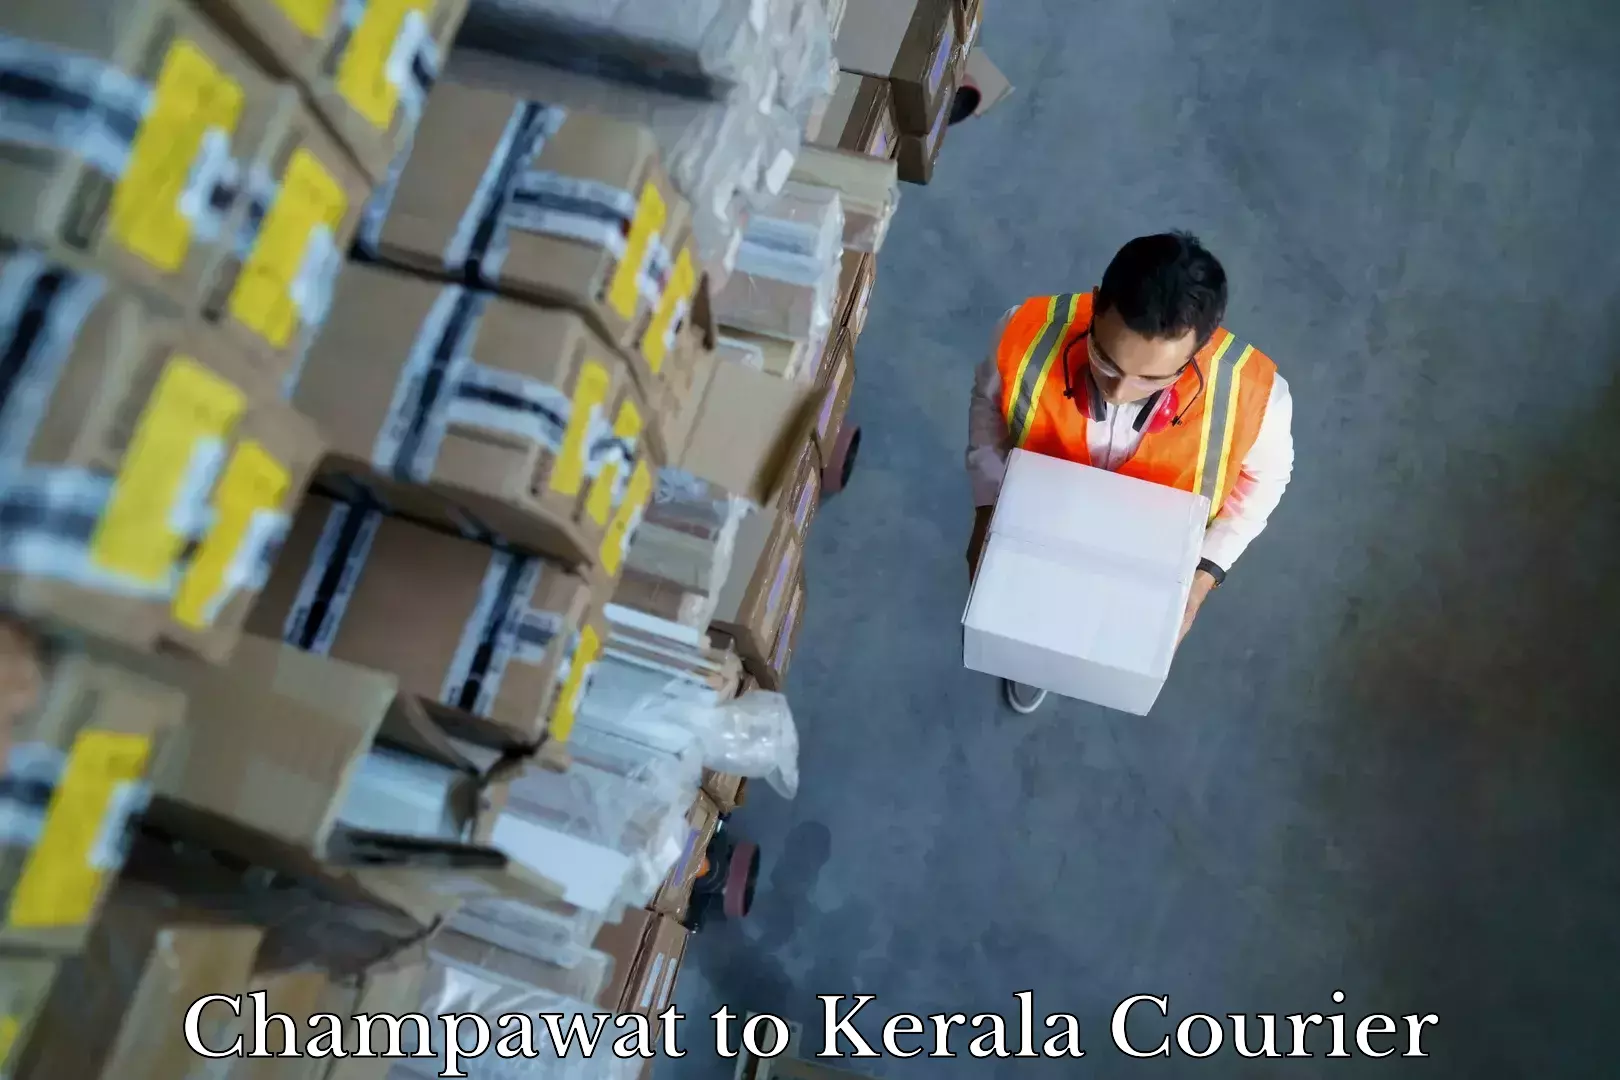 Furniture moving specialists Champawat to Kerala